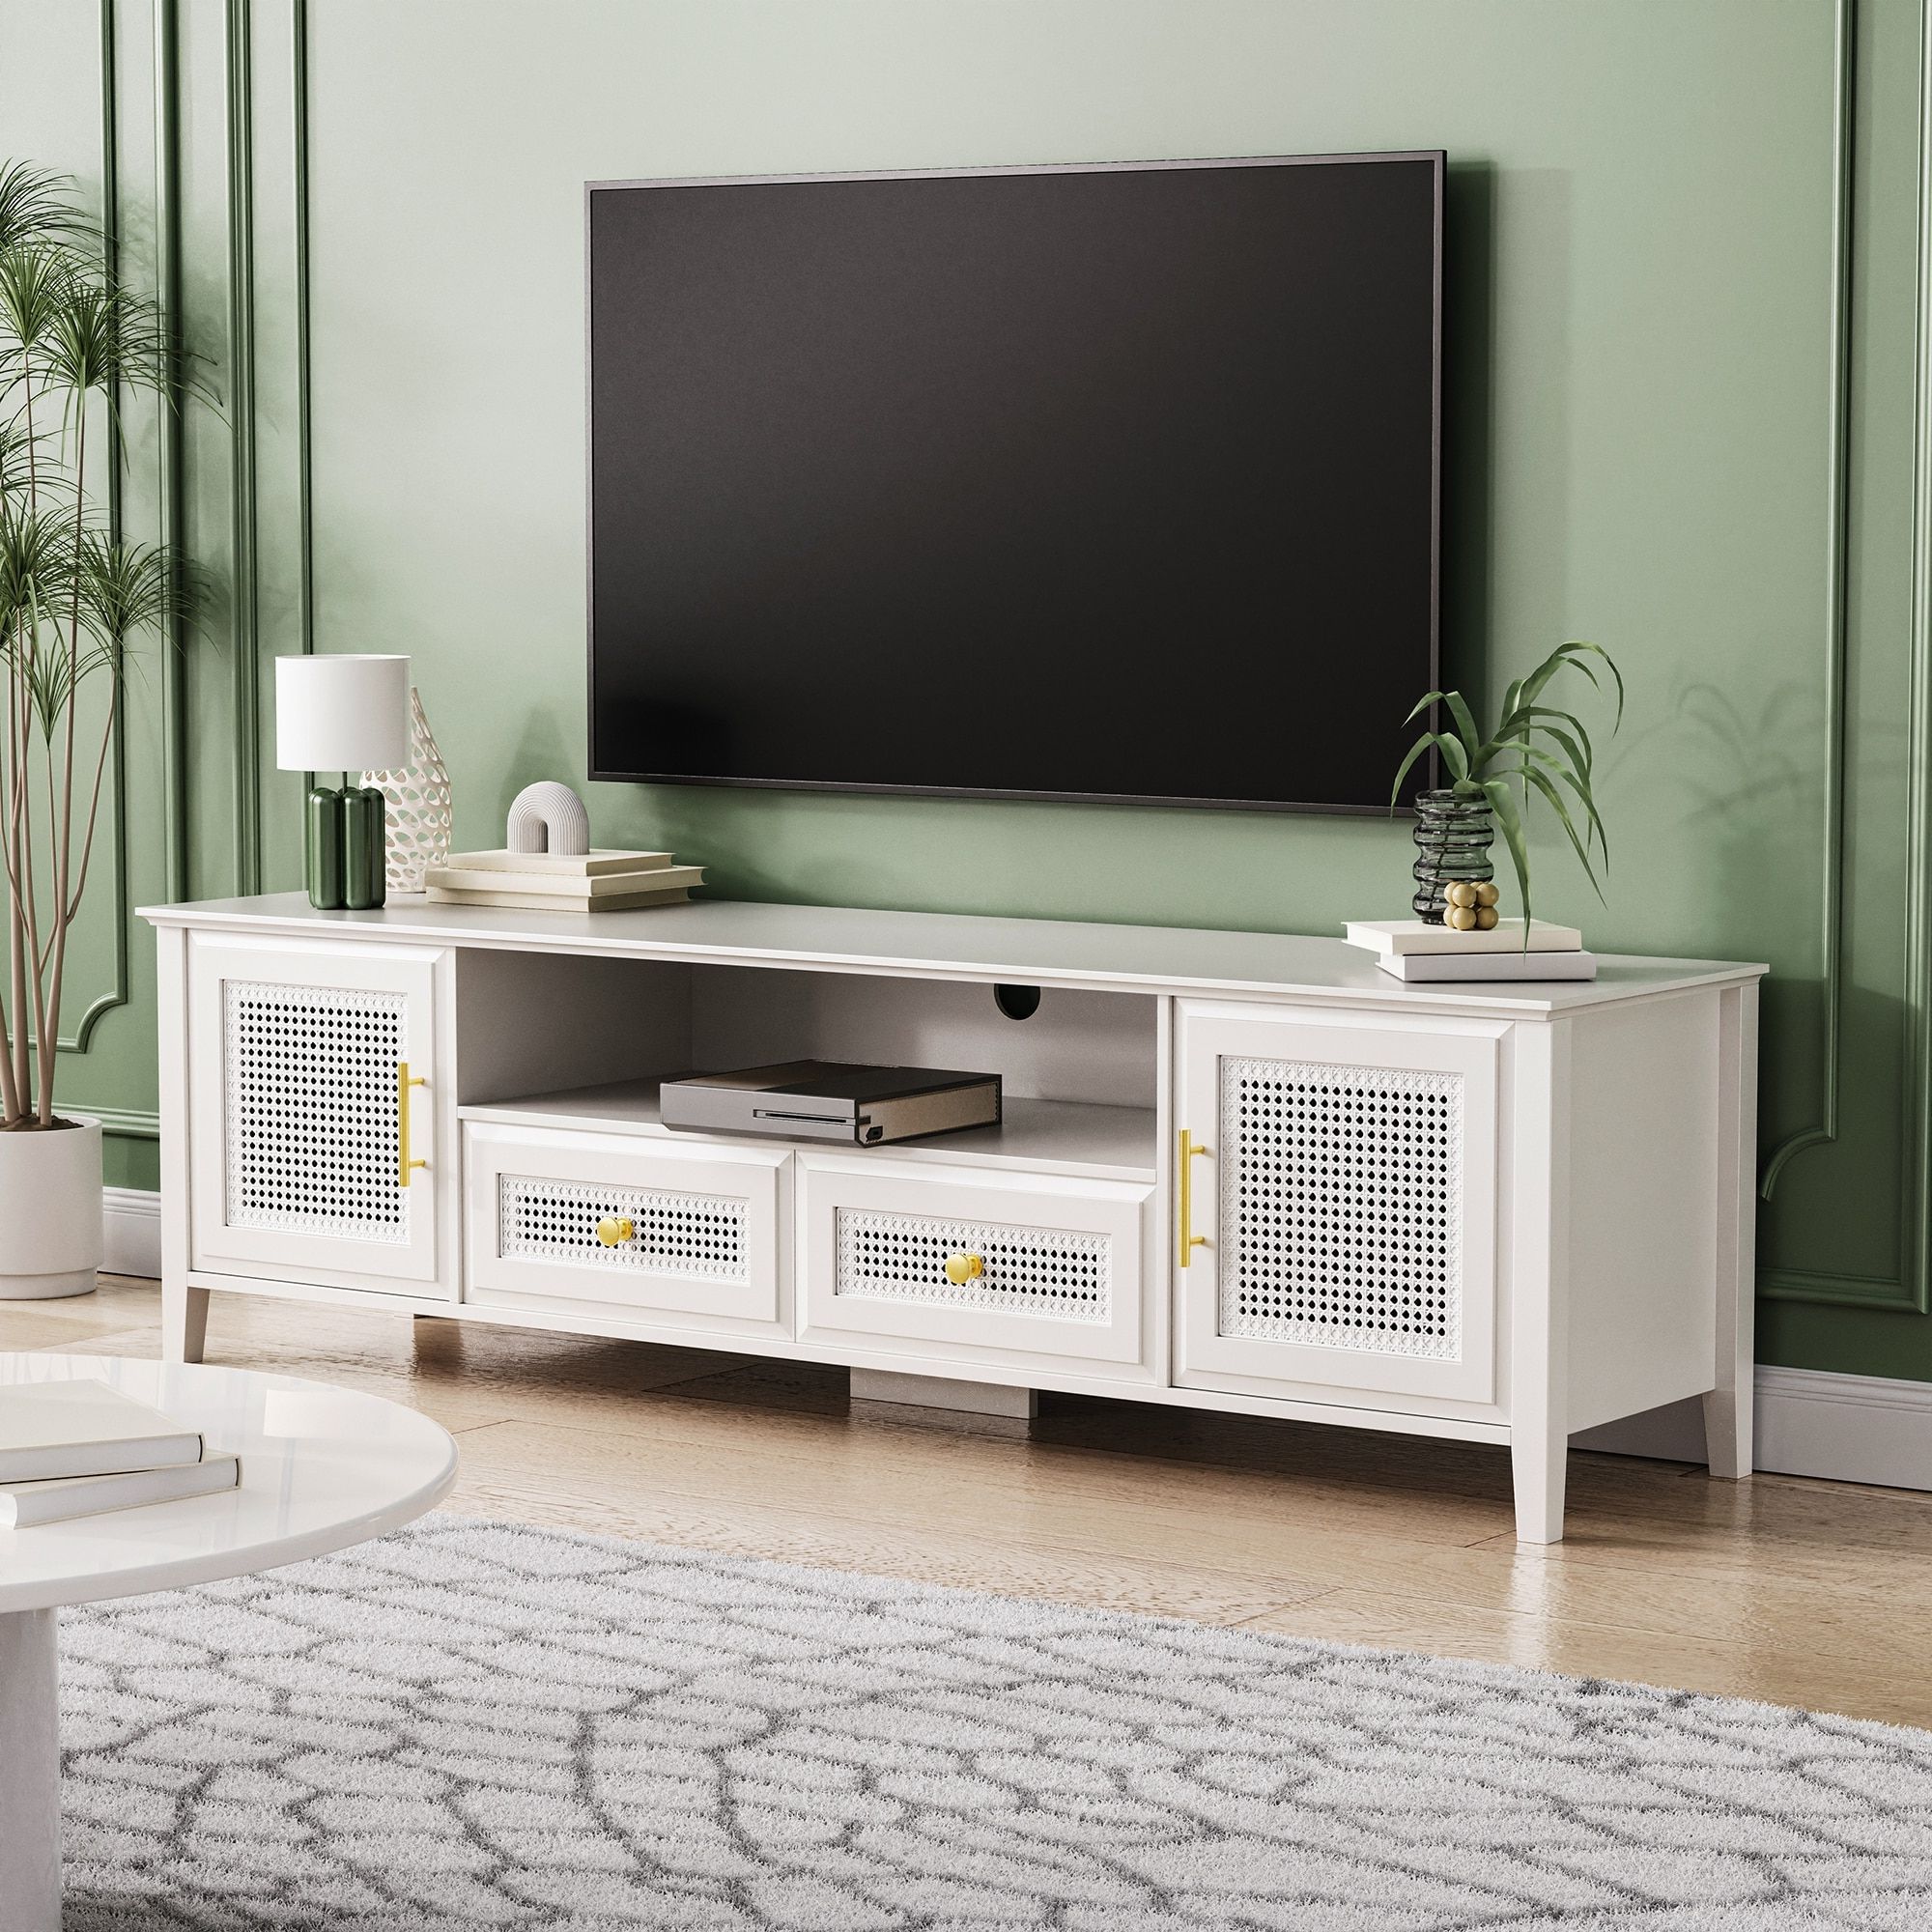 Farmhouse Rattan Tv Stand For Tvs Up To 65", Boho Style Entertainment  Center With Gold Metal Handles – On Sale – Bed Bath & Beyond – 38102434 Within Farmhouse Rattan Tv Stands (View 4 of 20)